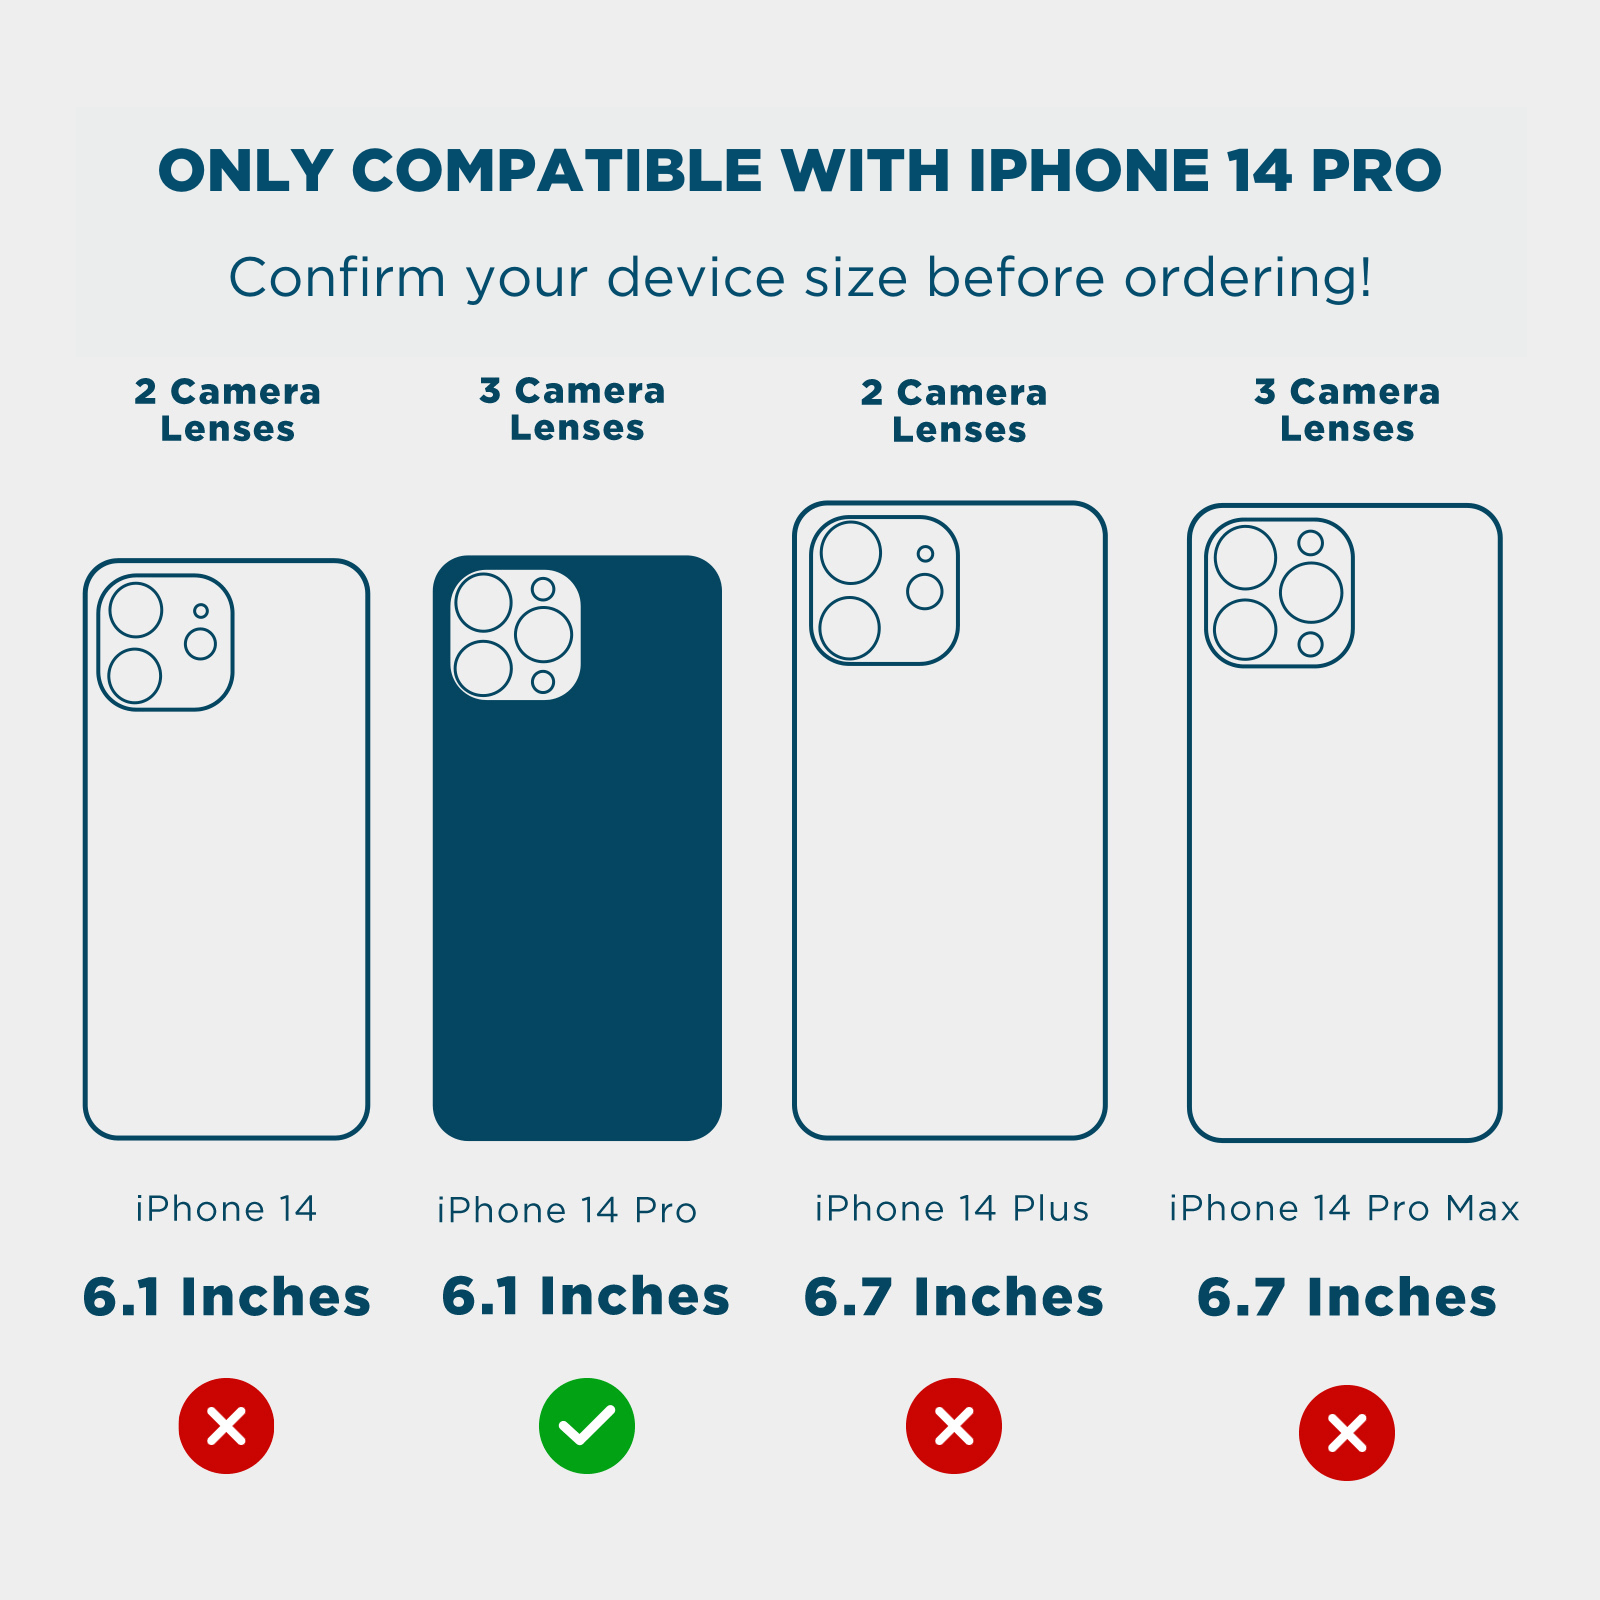 ONLY COMPATIBLE WITH IPHONE 14 PRO. CONFIRM YOUR DEVICE SIZE BEFORE ORDERING. 2 CAMERA LENSES, 3 CAMERA LENSES, 2 CAMERA LENSES, 3 CAMERA LENSES, 6.1, 6.1, 6.7, 6.7. COLOR::KARAT ONYX